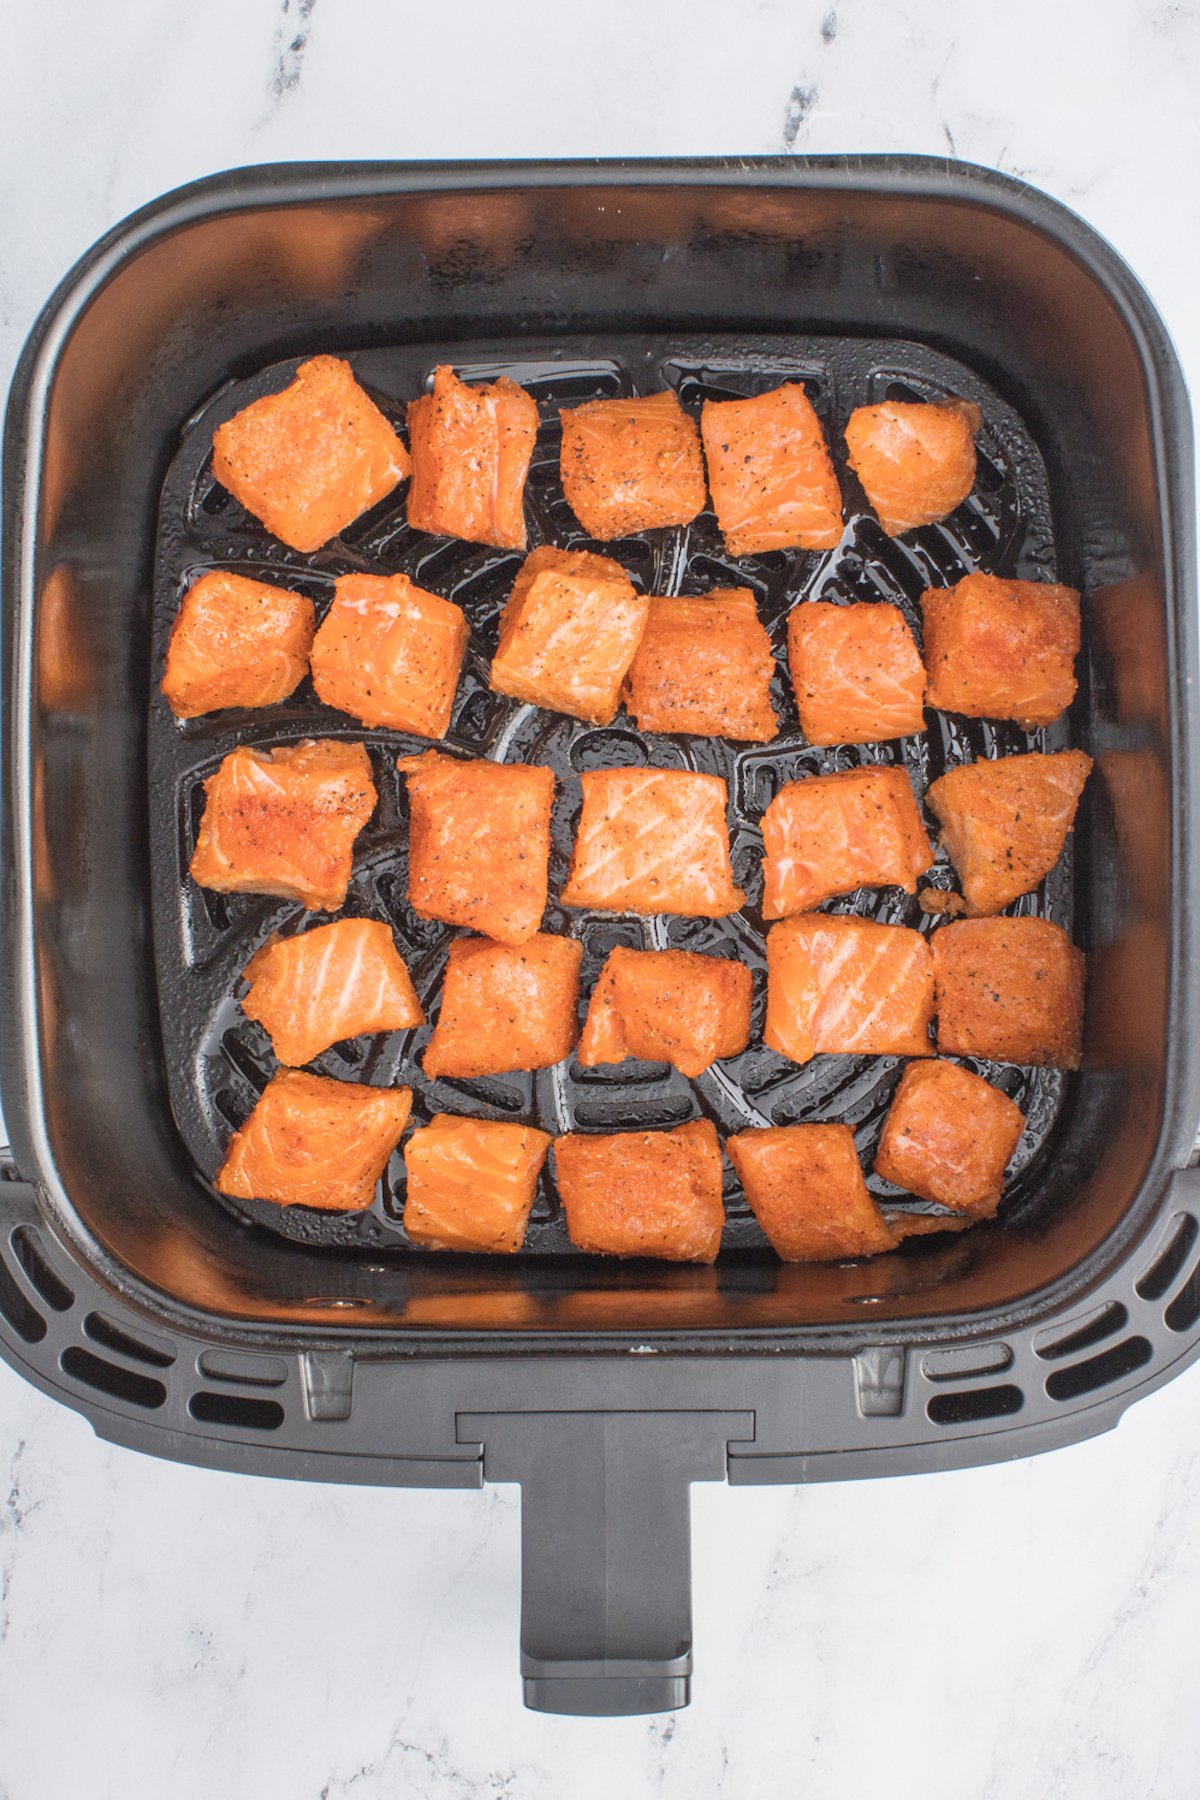 Raw seasoned cubed salmon bites in a single layer in an air fryer basket.